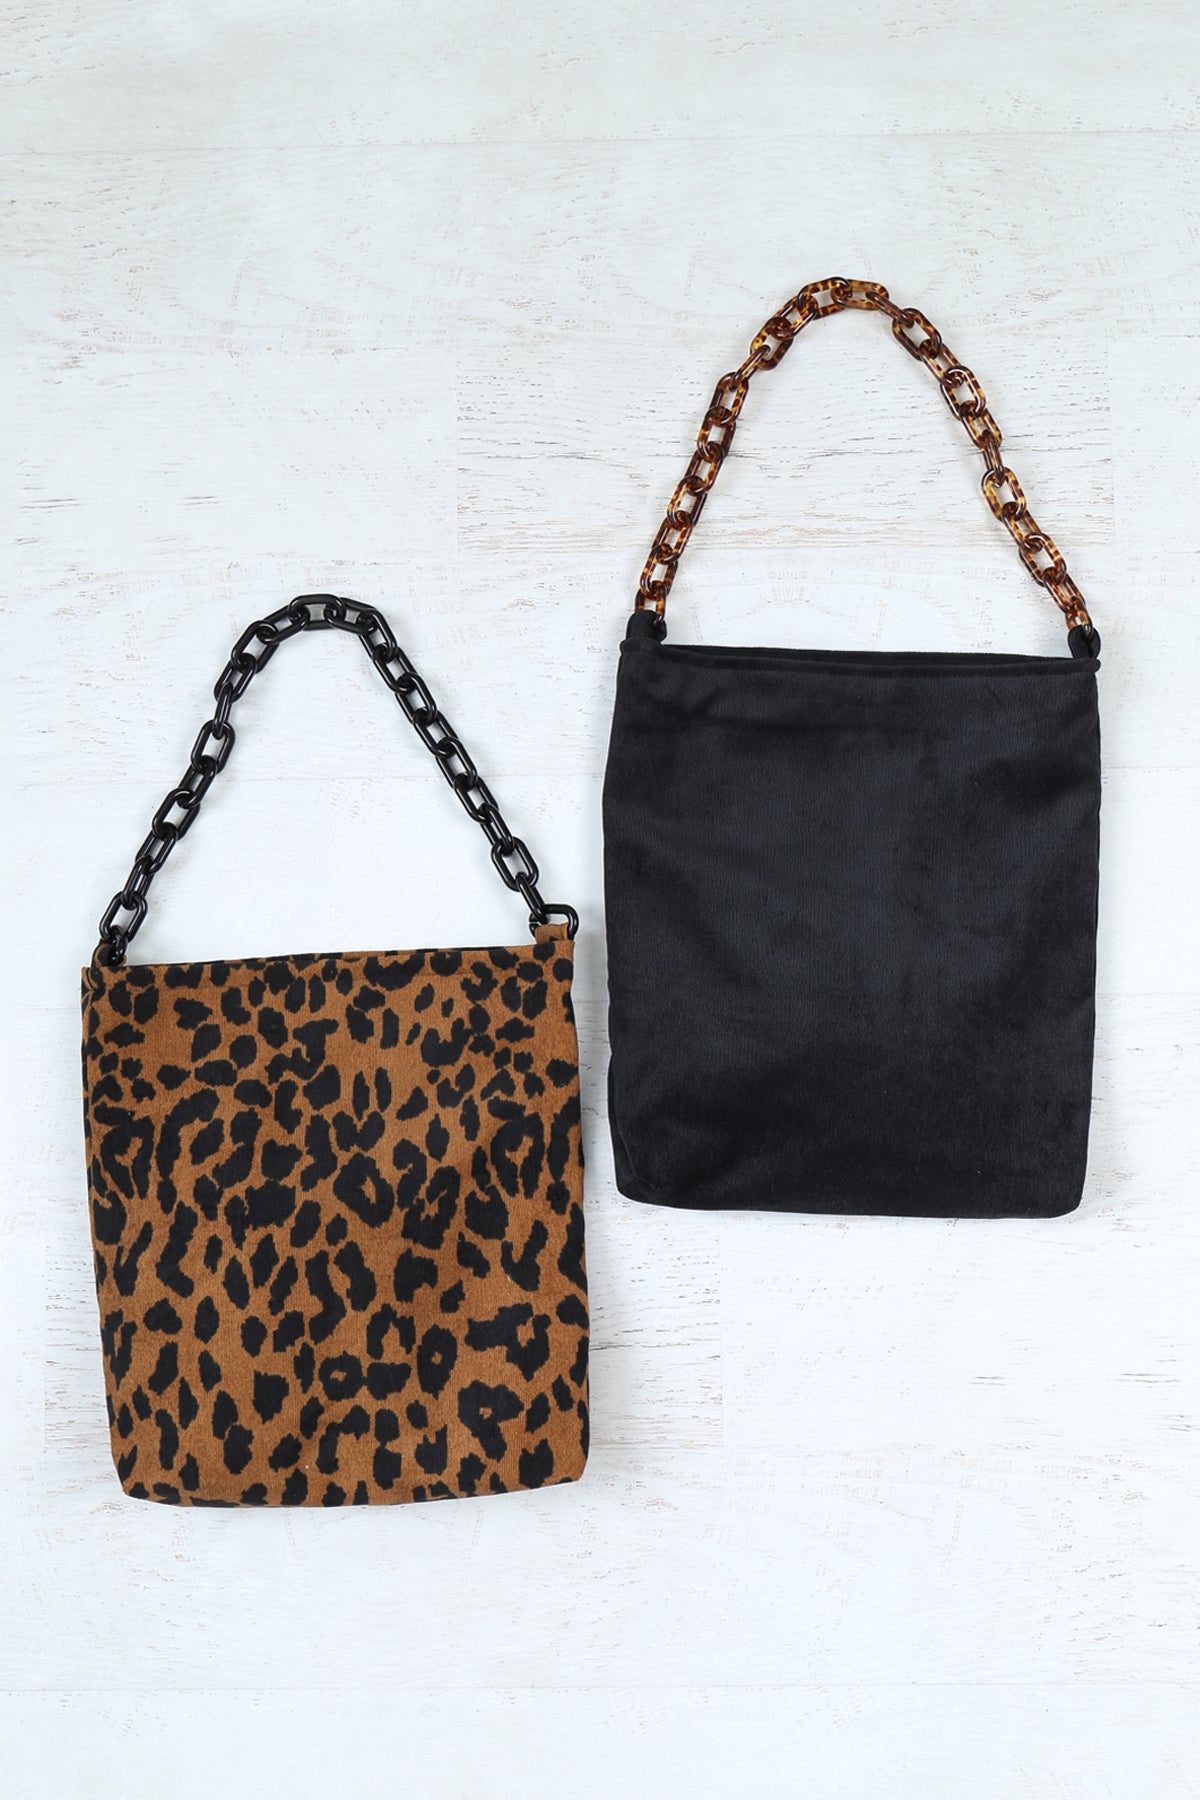 CHAIN HANDLE FASHION TOTE BAG (NOW $3.50 ONLY!)